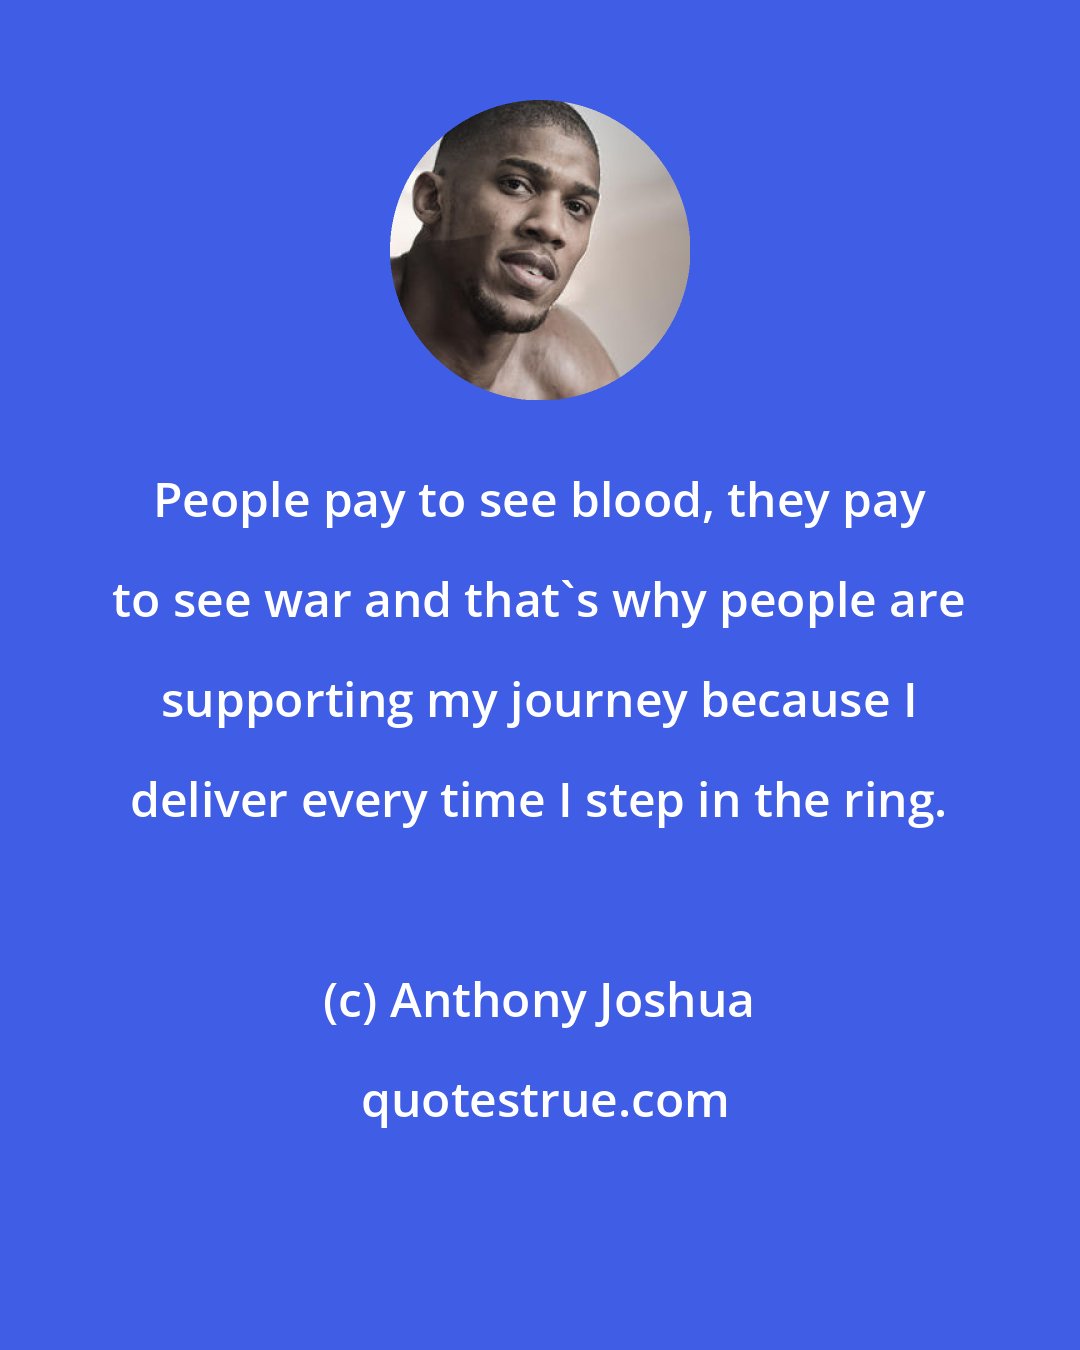 Anthony Joshua: People pay to see blood, they pay to see war and that's why people are supporting my journey because I deliver every time I step in the ring.